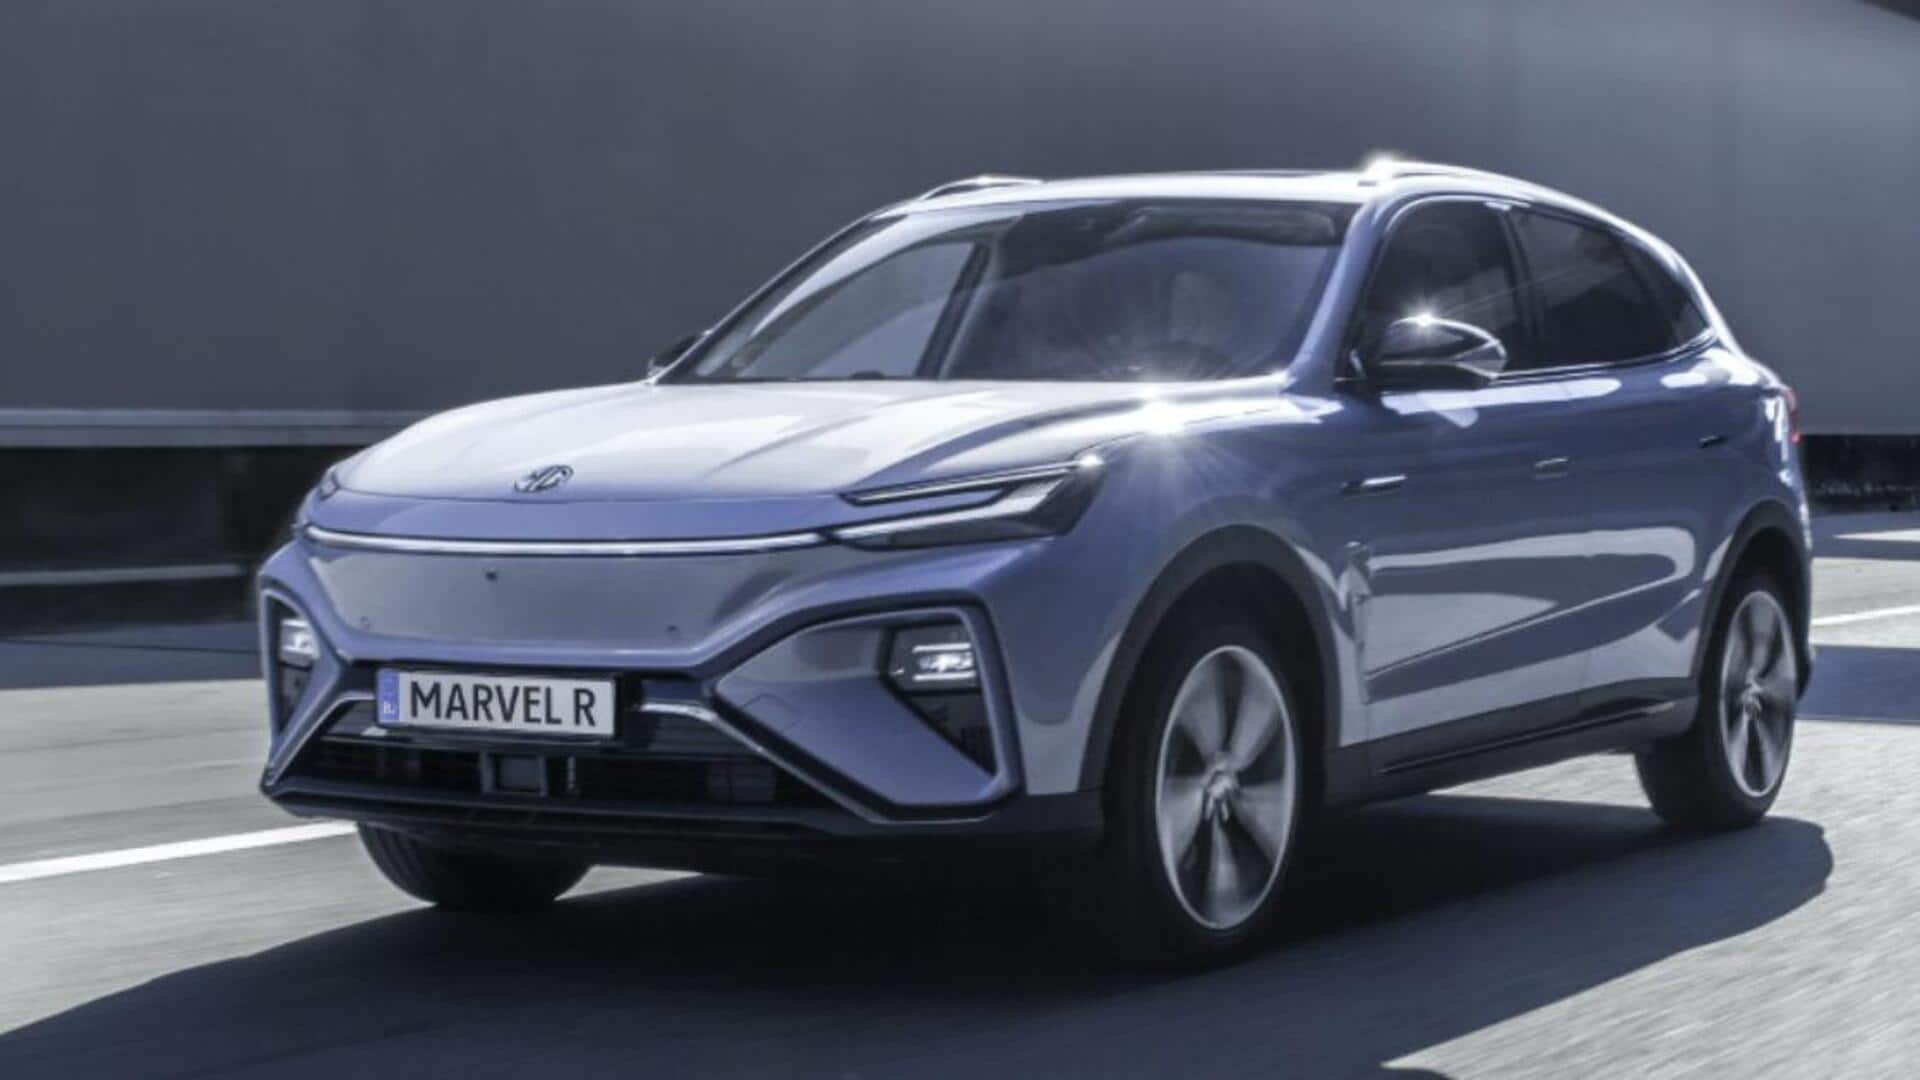 MG Motor to revamp its lineup with new flagship e-SUV